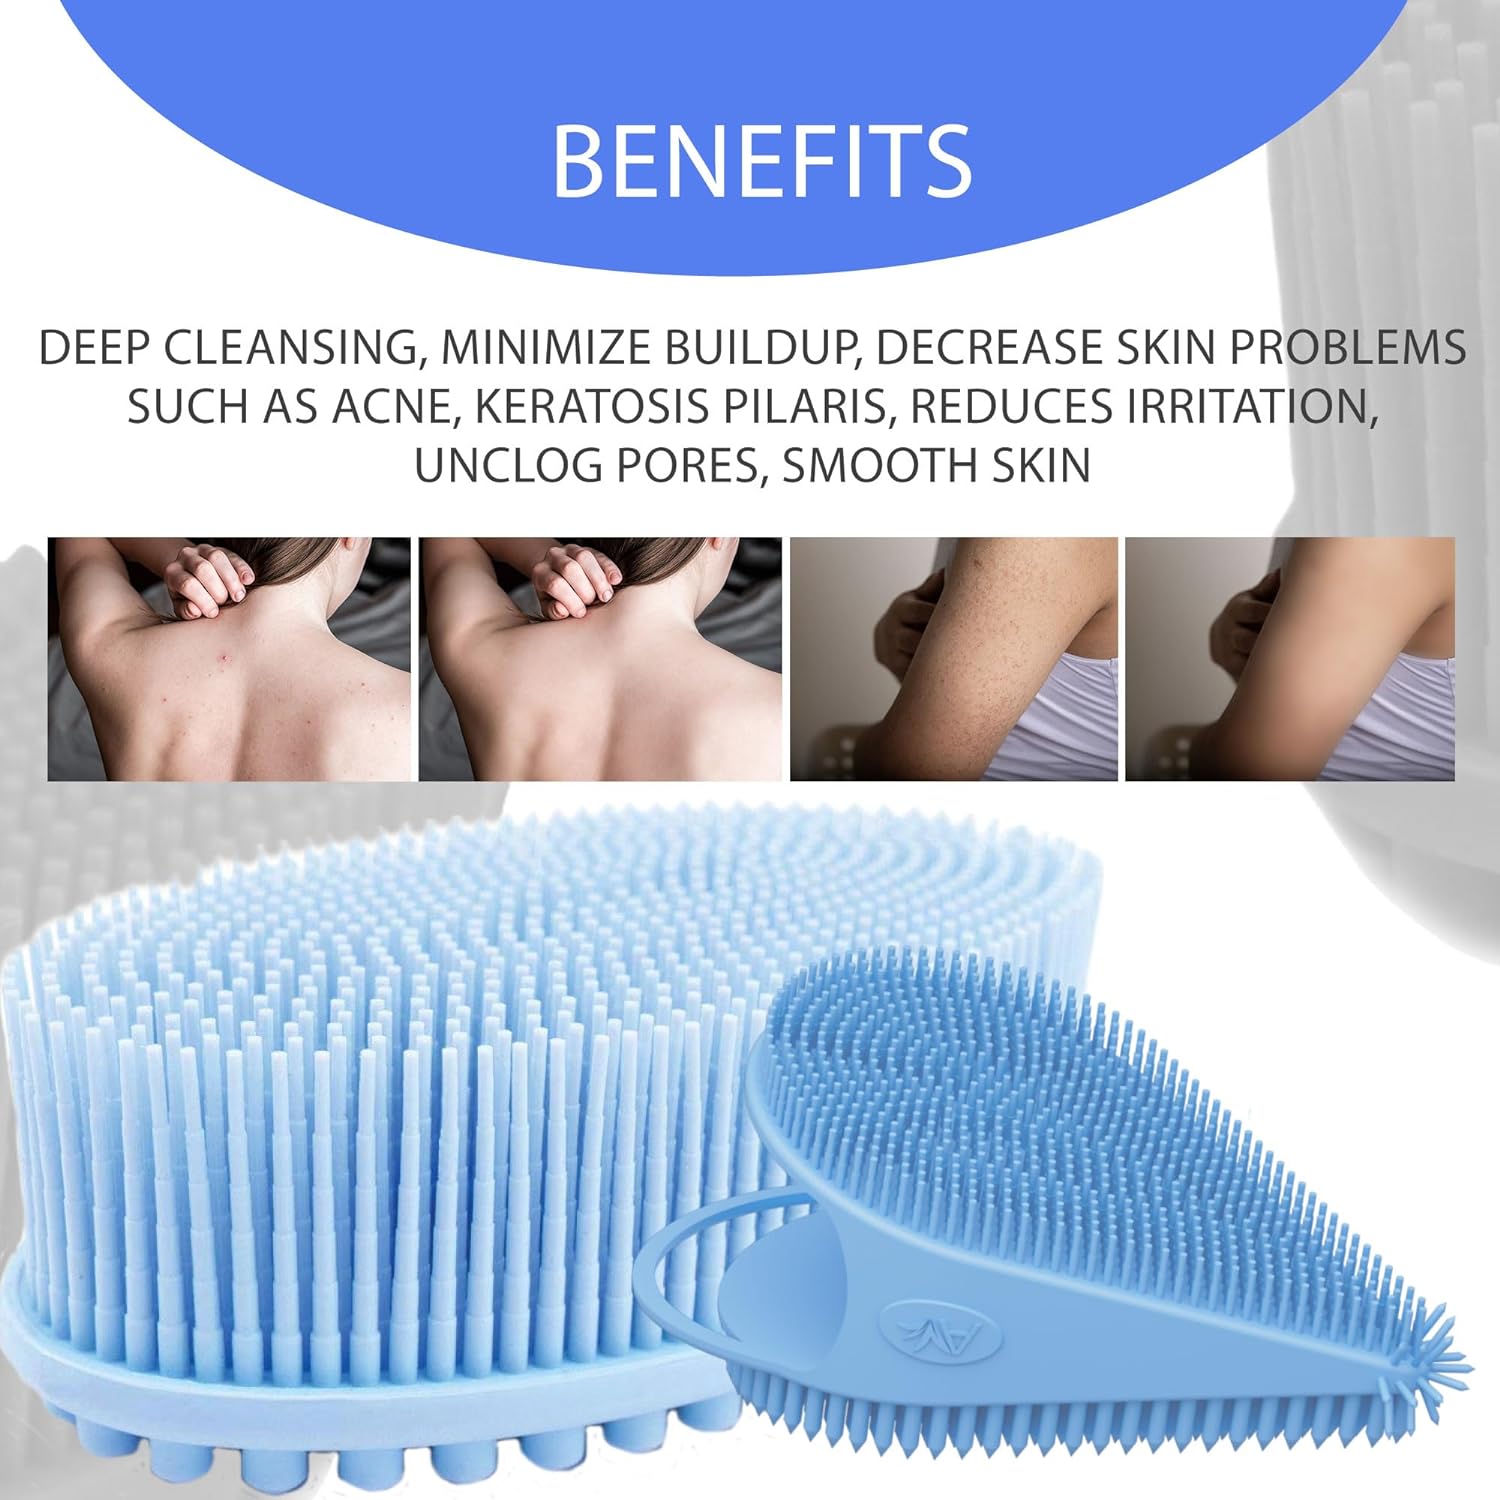 Avilana Exfoliating Silicone Body Scrubber Easy To Clean, Lathers Well, Long Lasting, And More Hygienic Than Traditional Loofah (Combo-Blue)